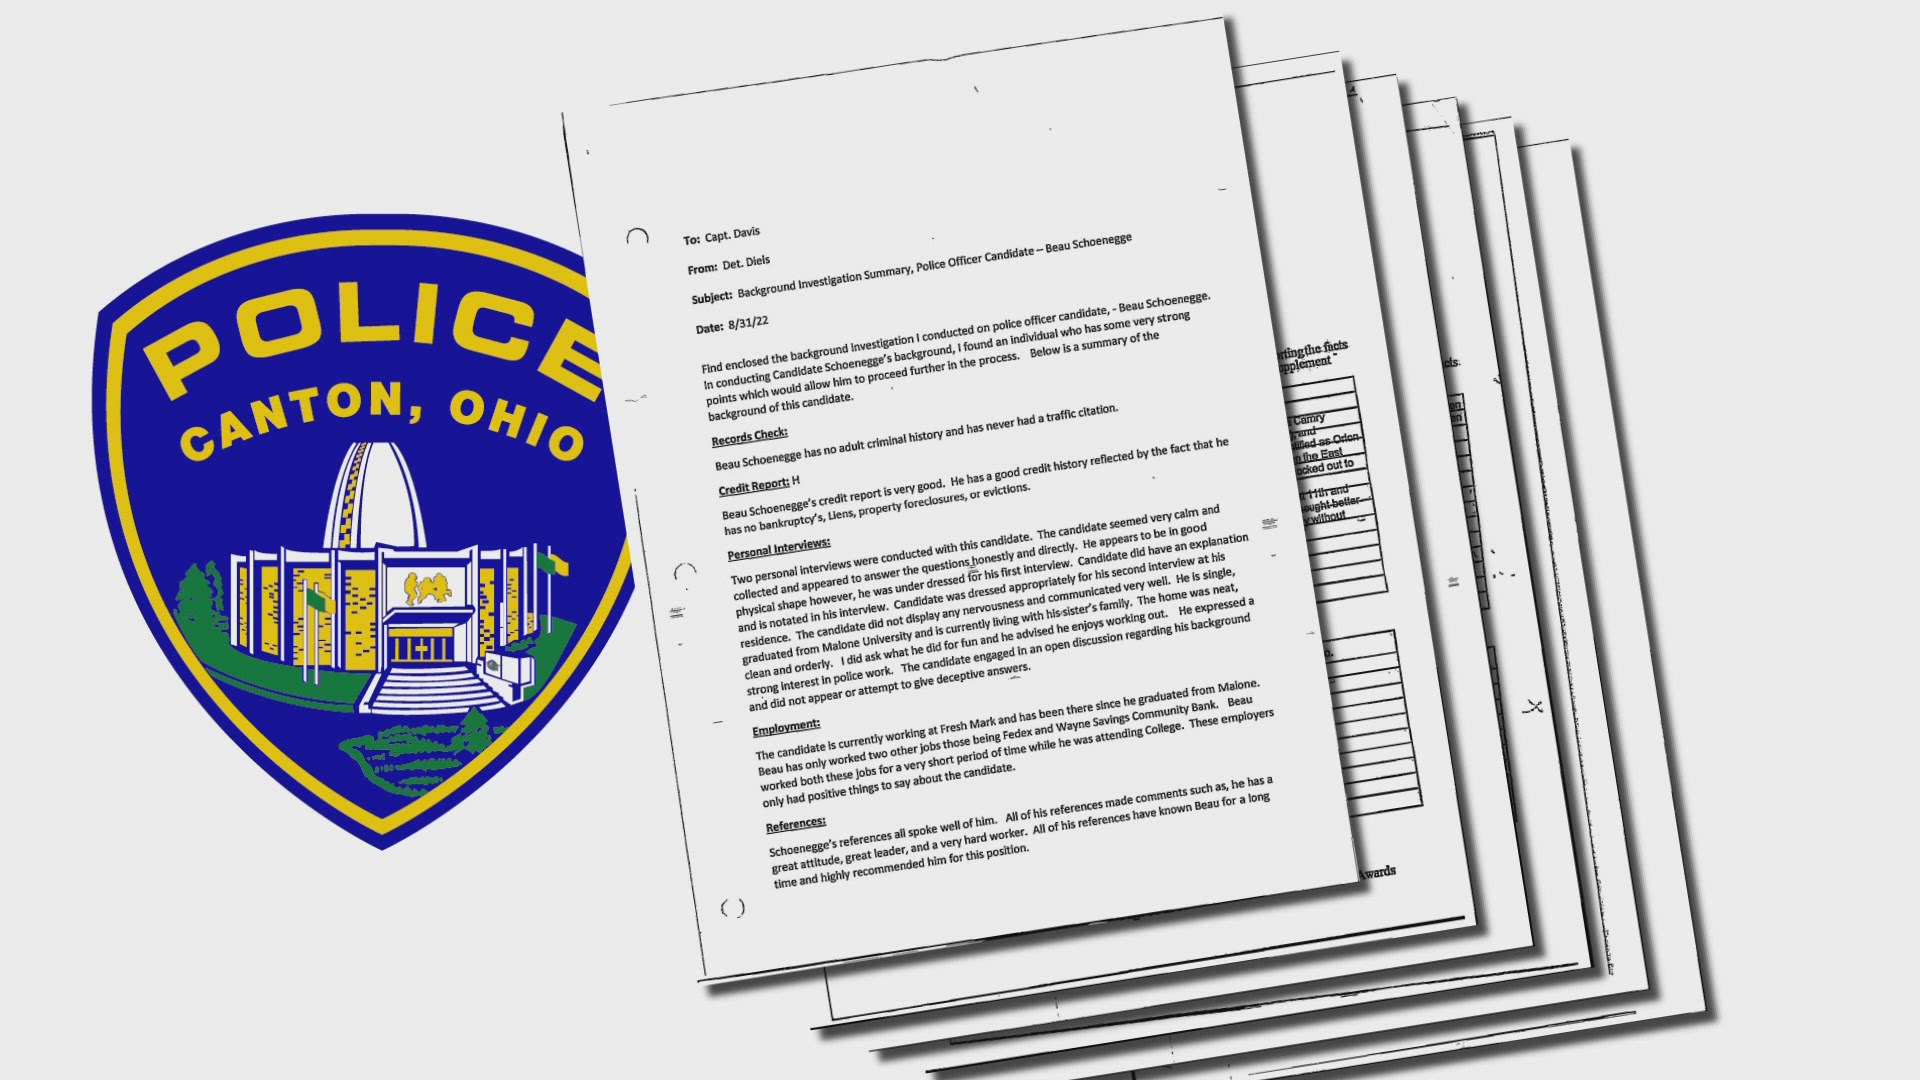 We are getting our first look at the personnel files of the officers involved.  Both are 24 years-old.